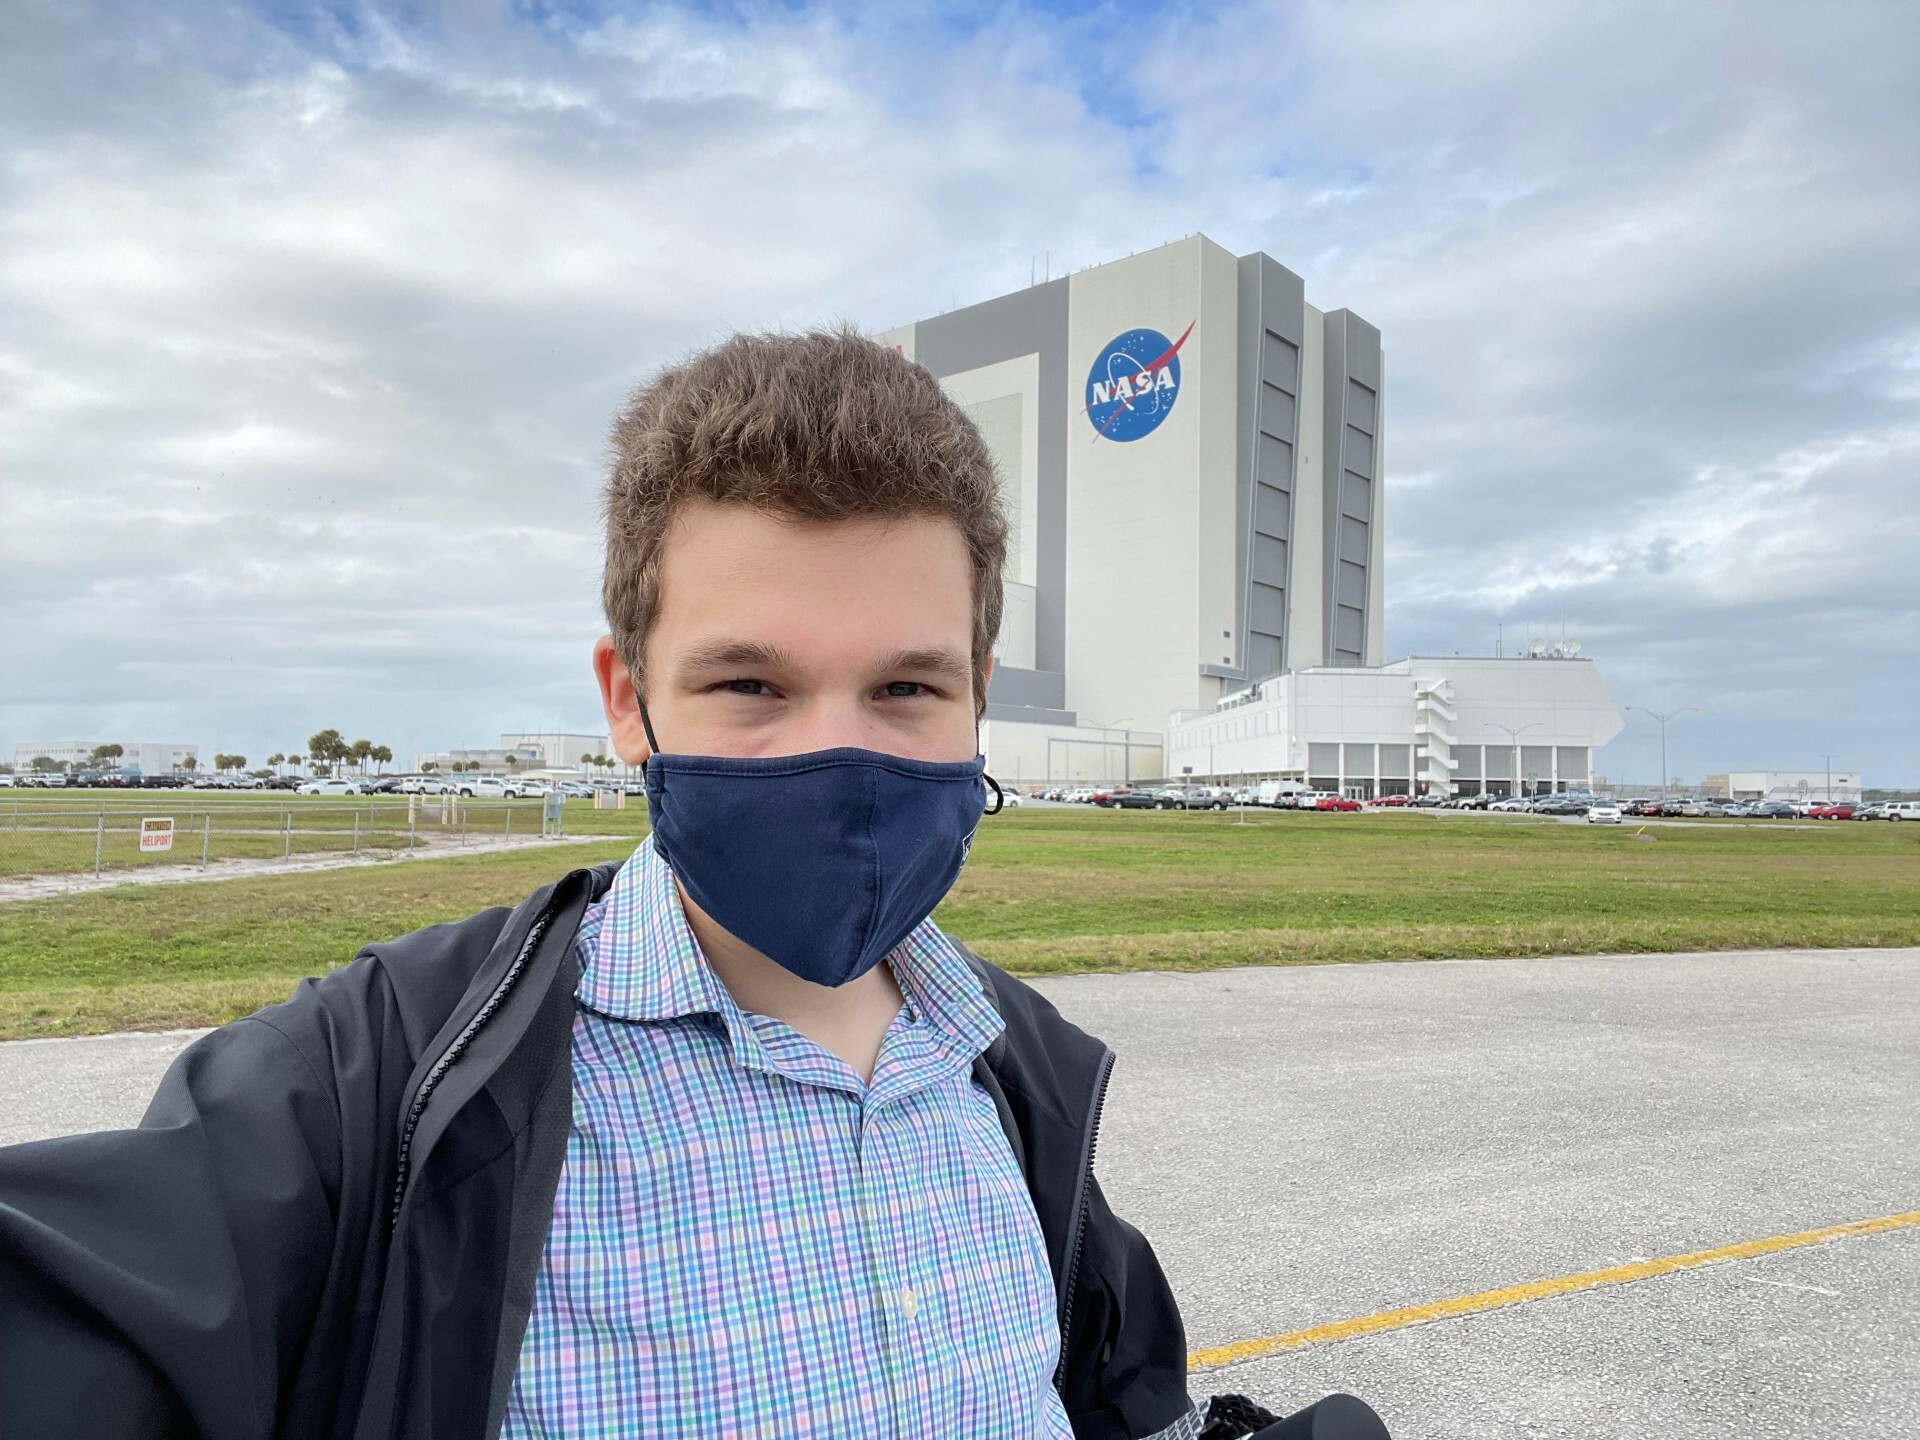 Theo Nelson takes a selfie while wearing a mask in front of the Kennedy Space Center